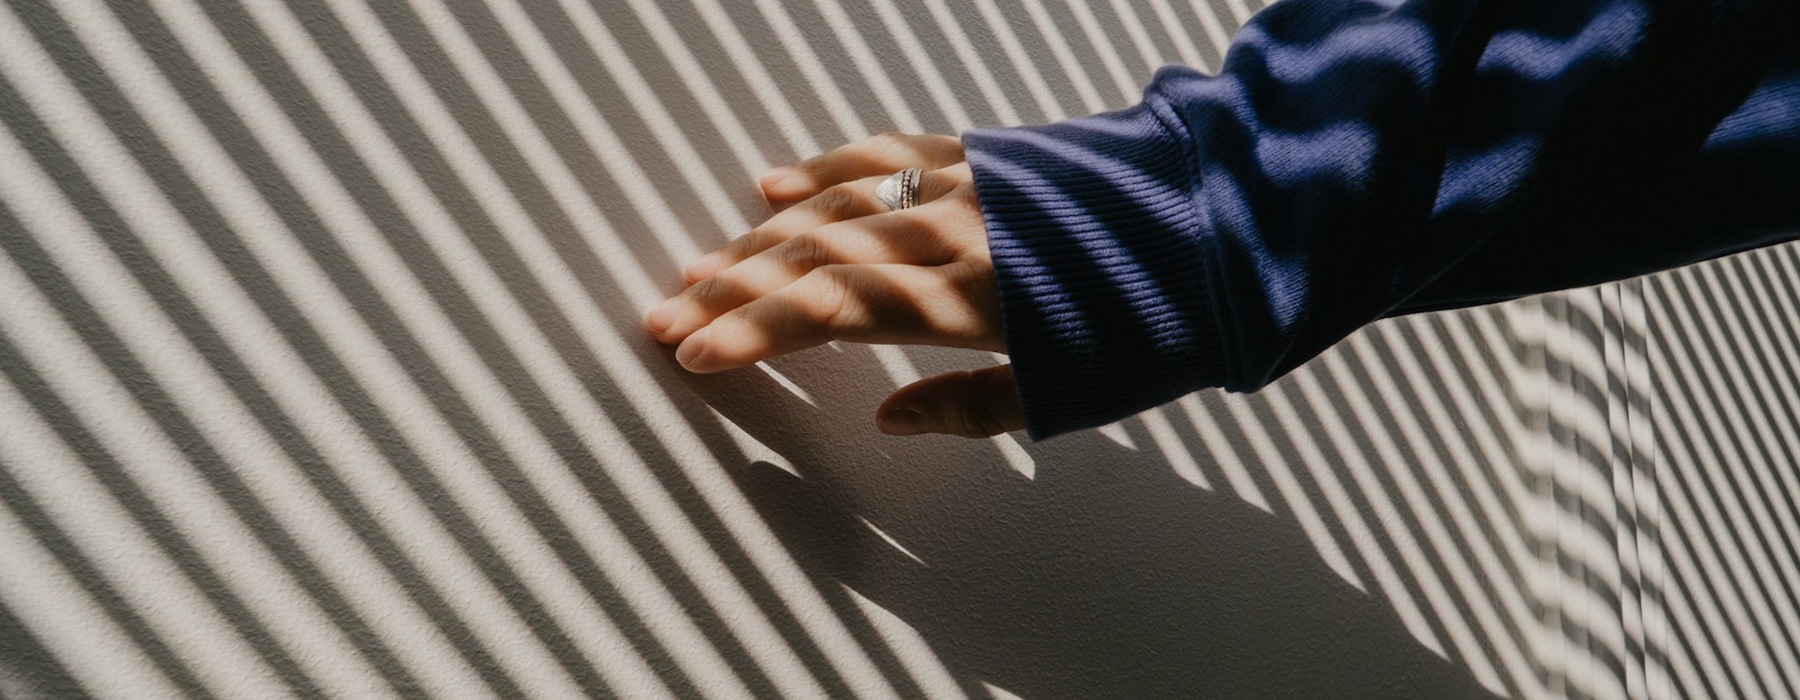 lifestyle image of a person running their hand along a wall